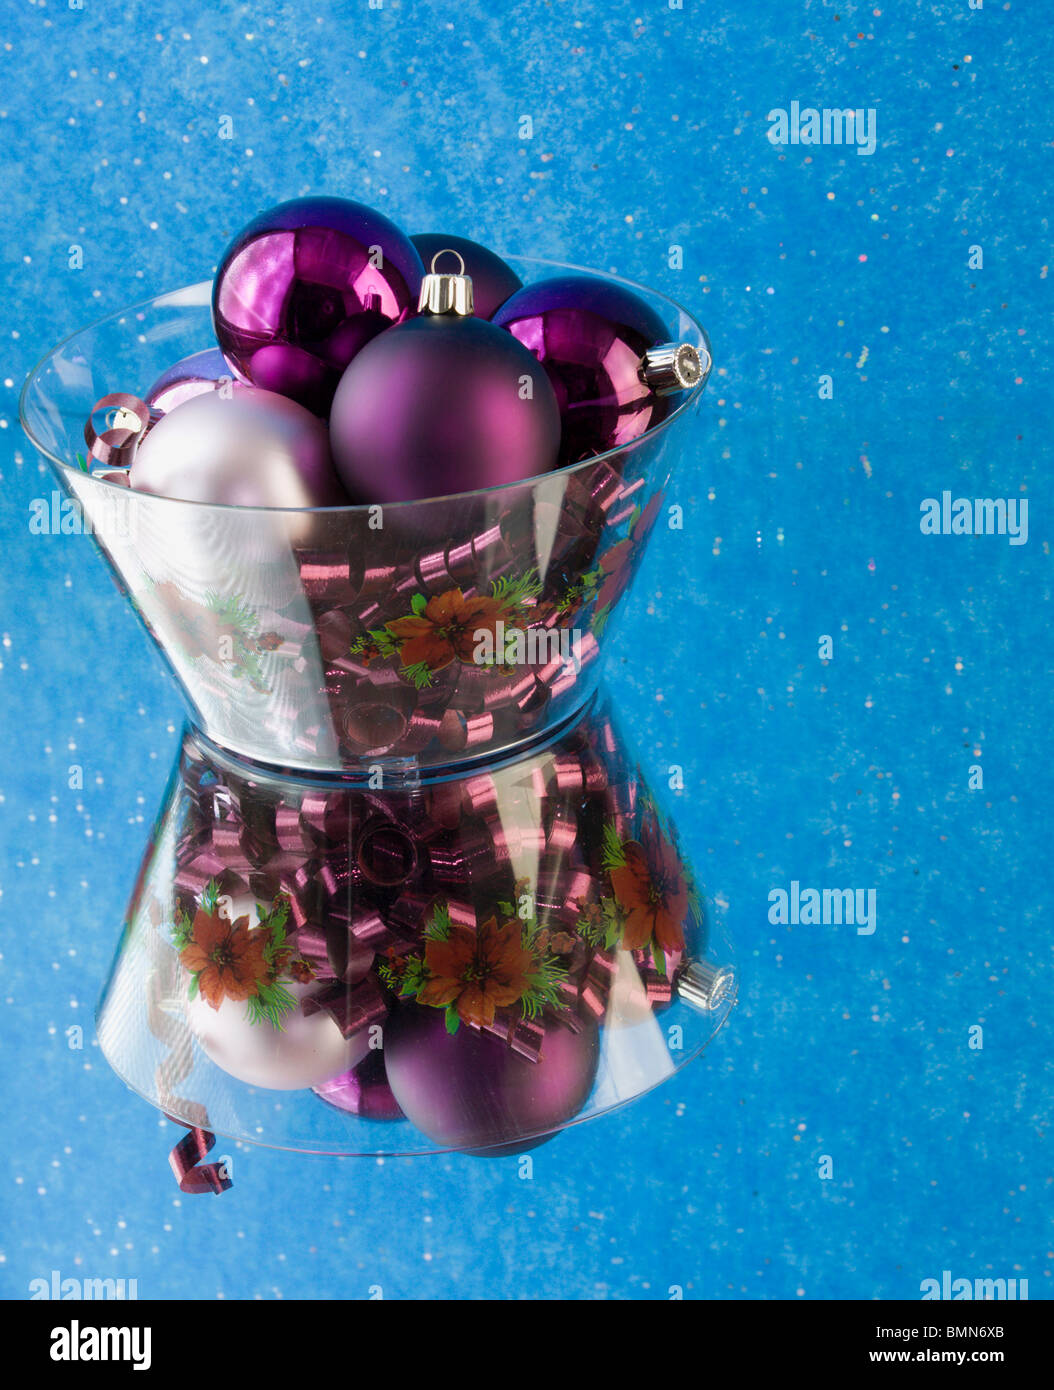 various purple Christmas ornaments in a bowl with copyspace Stock Photo